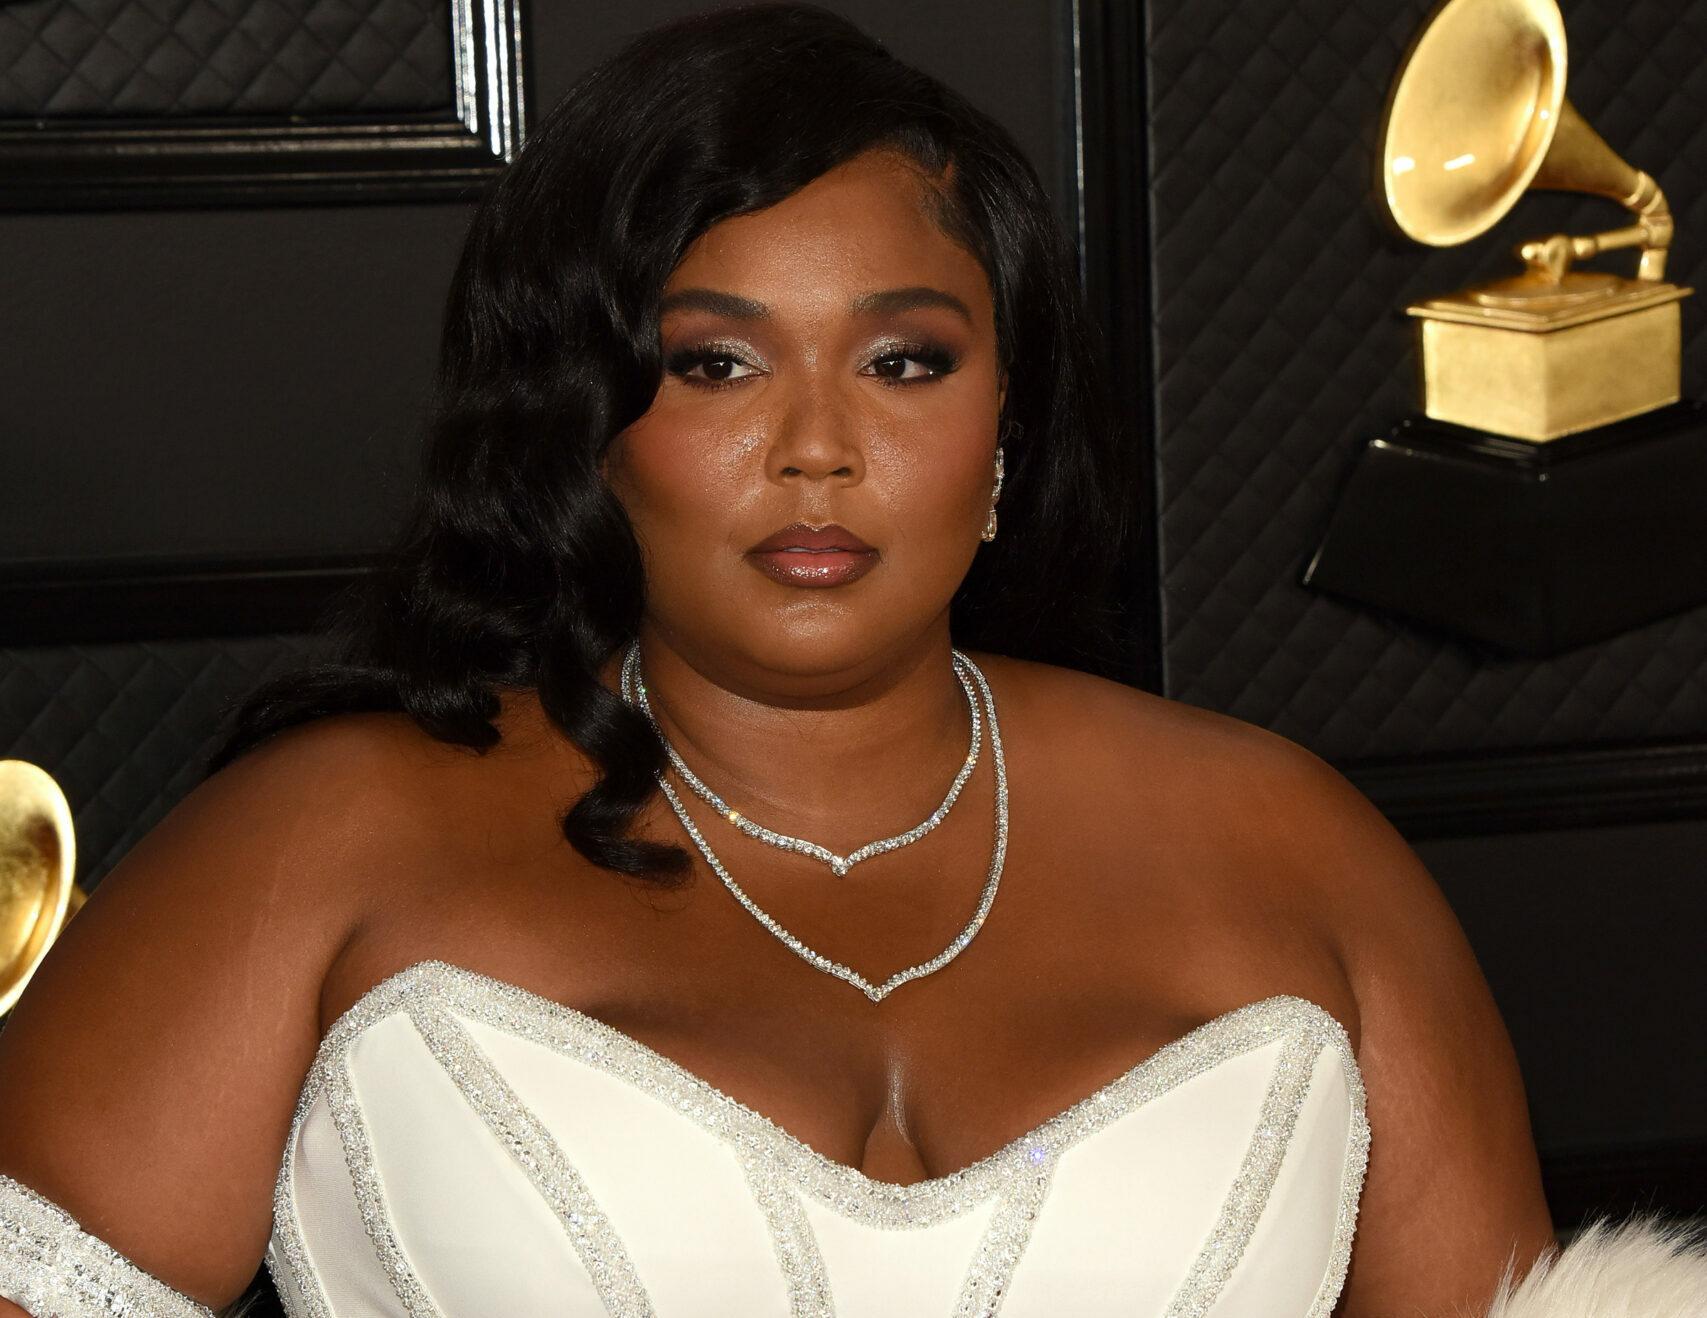 LOS ANGELES - JAN 26: Lizzo at the 62nd Grammy Awards at the Staples Center on January 26, 2020